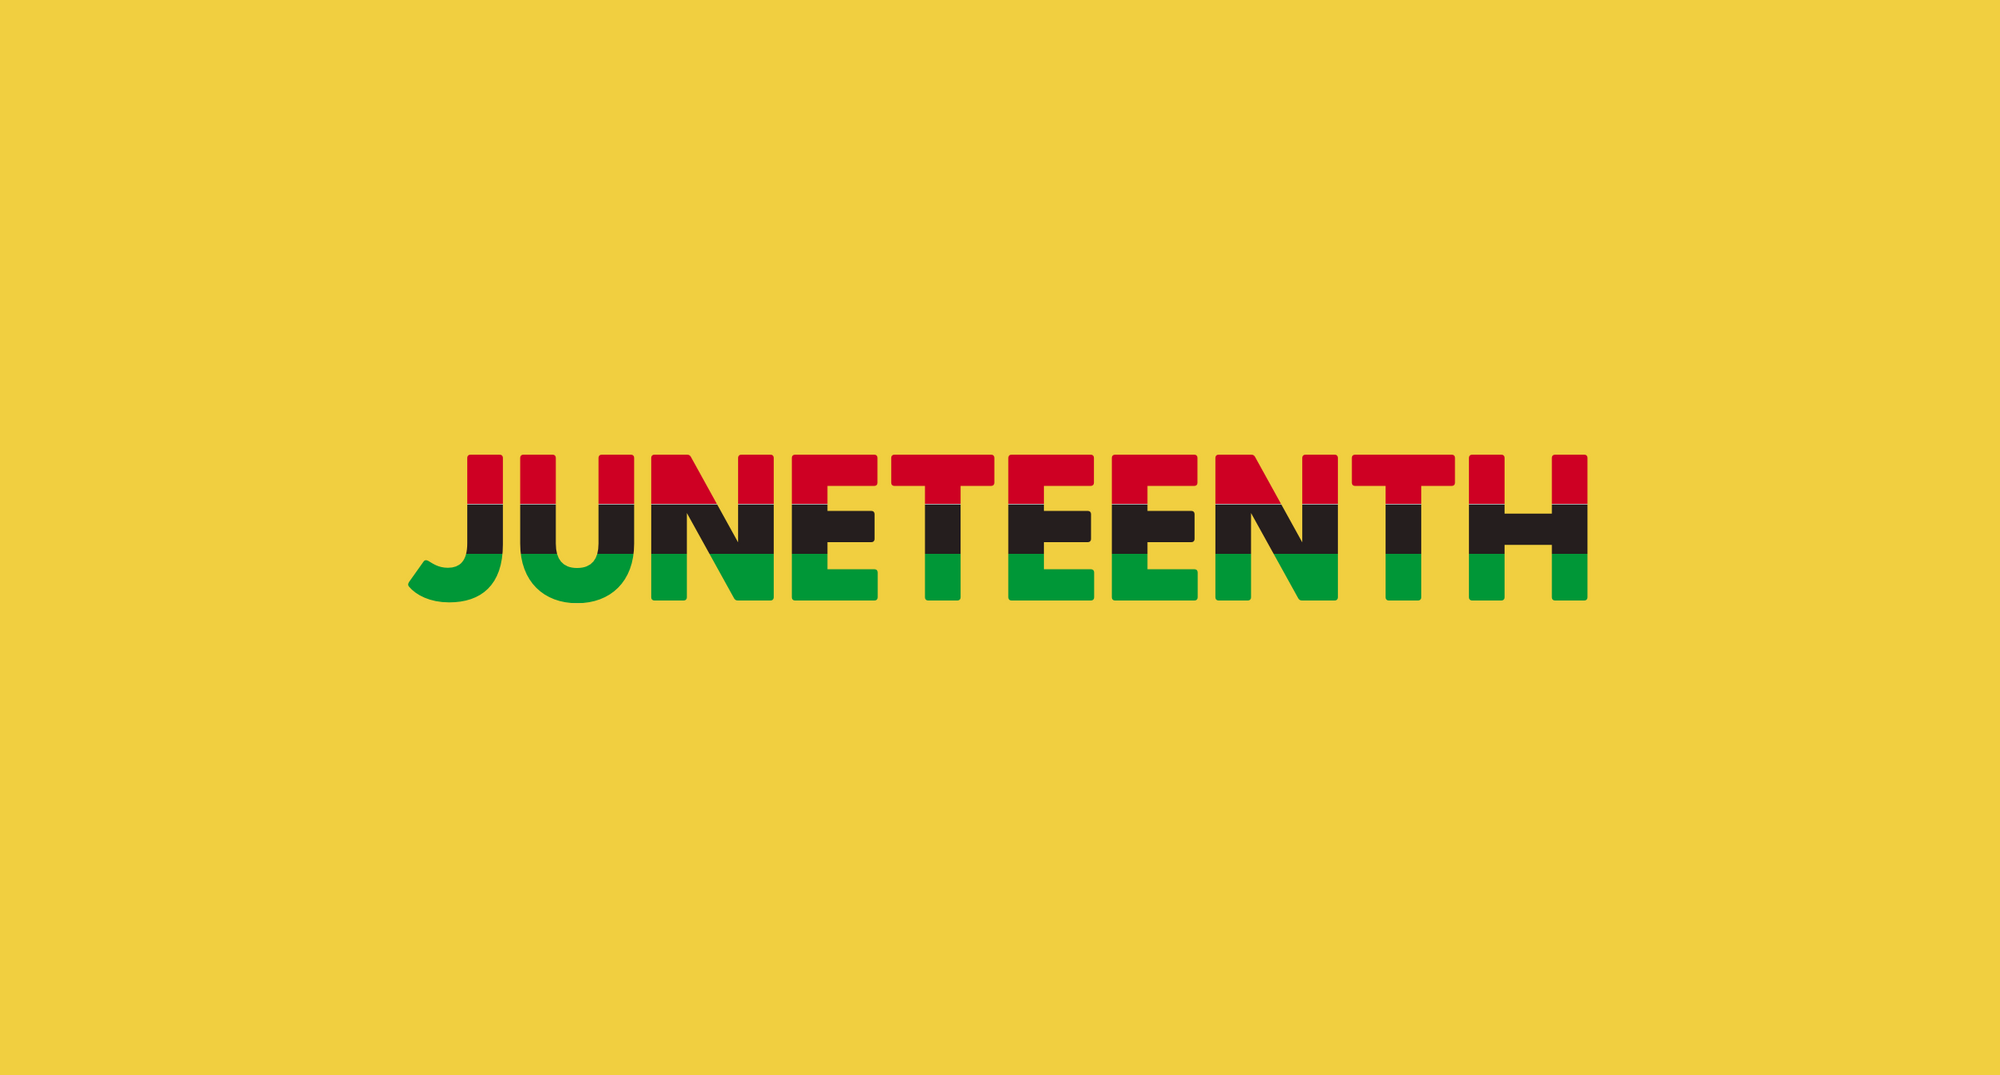 current-to-honor-juneteenth-with-company-holiday